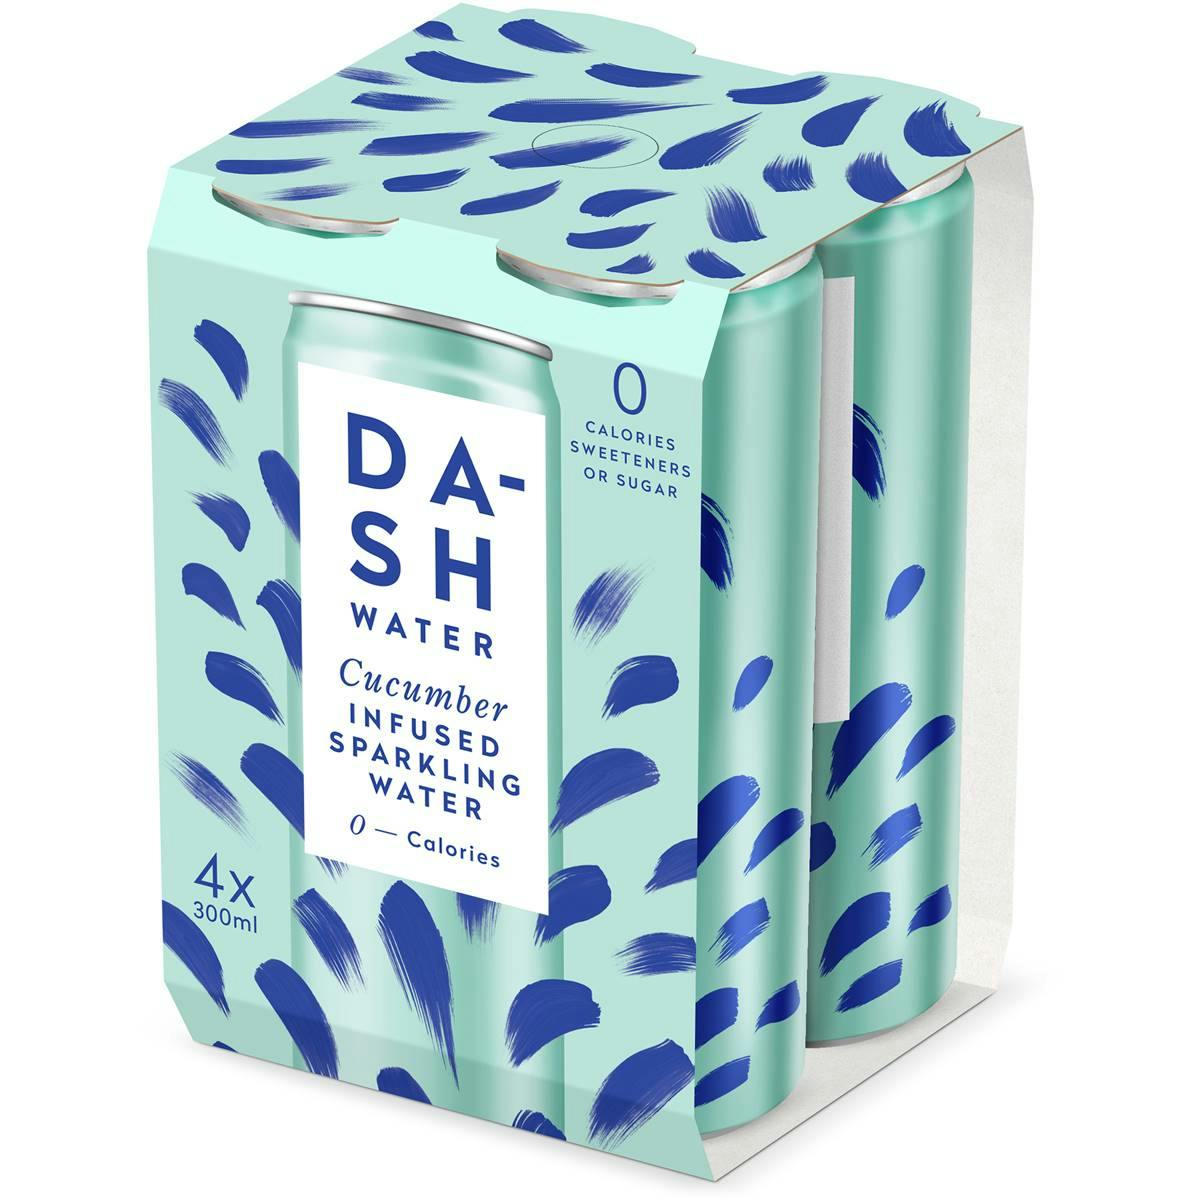 Dash Water Cucumber Infused Sparkling Water 300ml X4